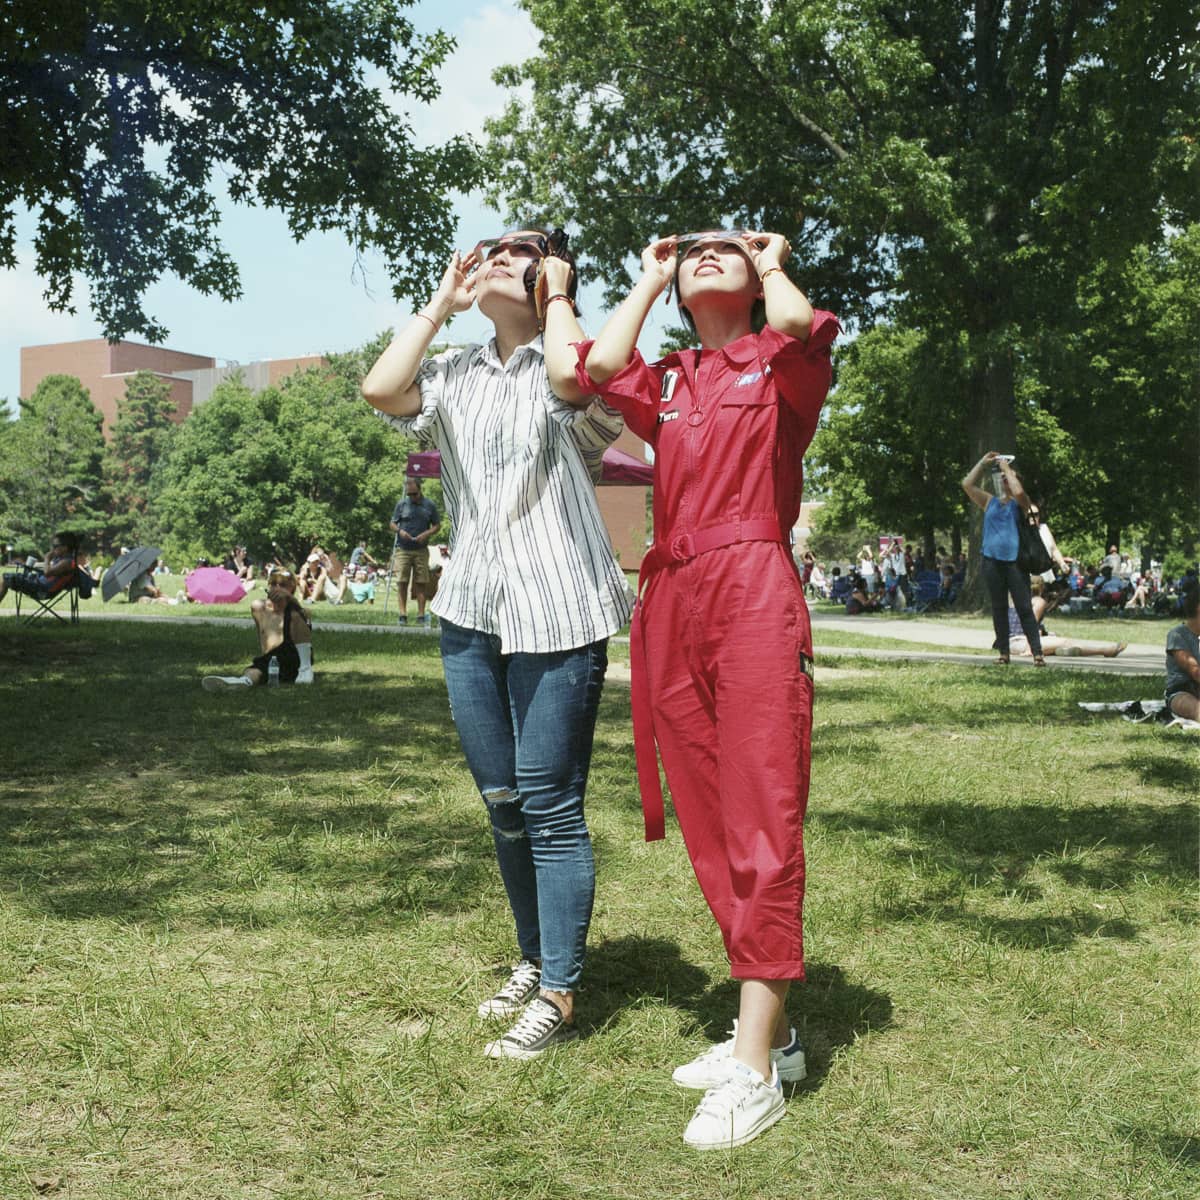 An analog portrait of two women watching the solar eclipse at SIU in Carbondale, Illinois